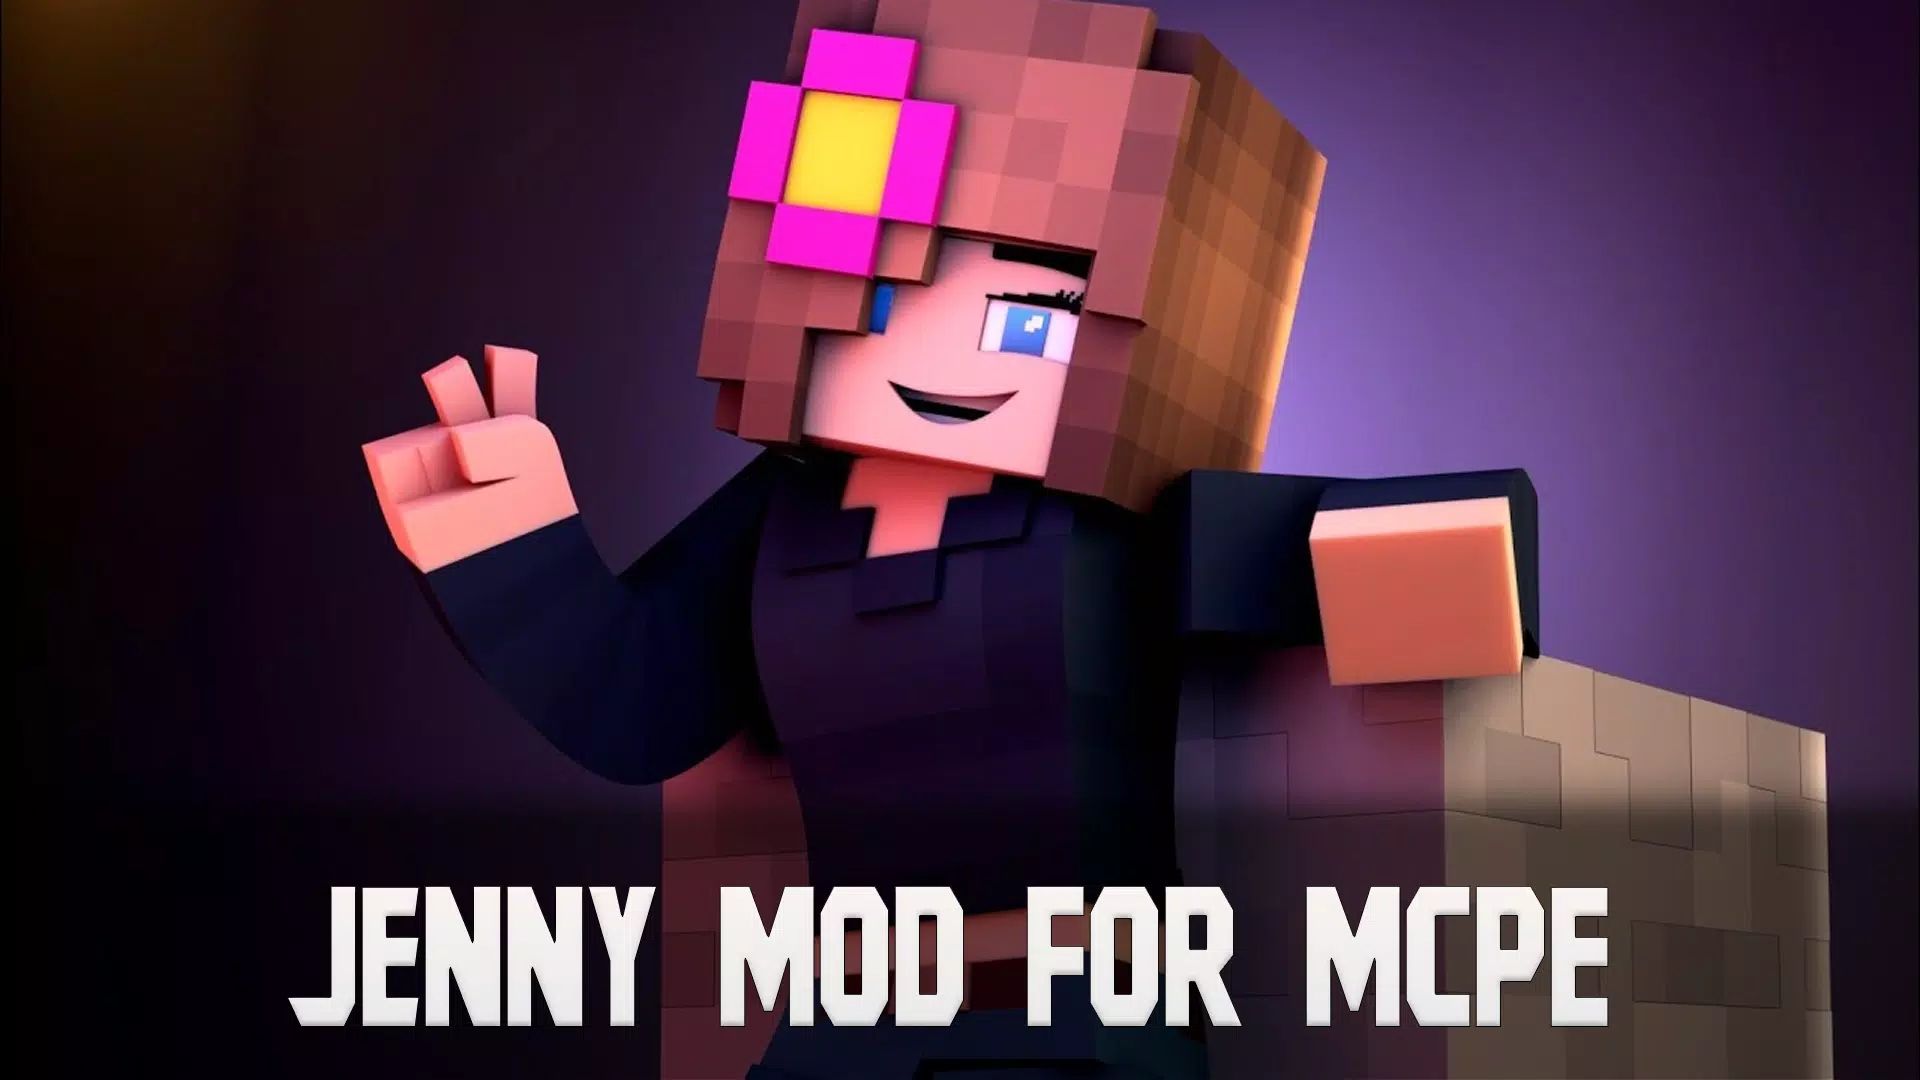 jenny mod in minecraft download android｜TikTok Search